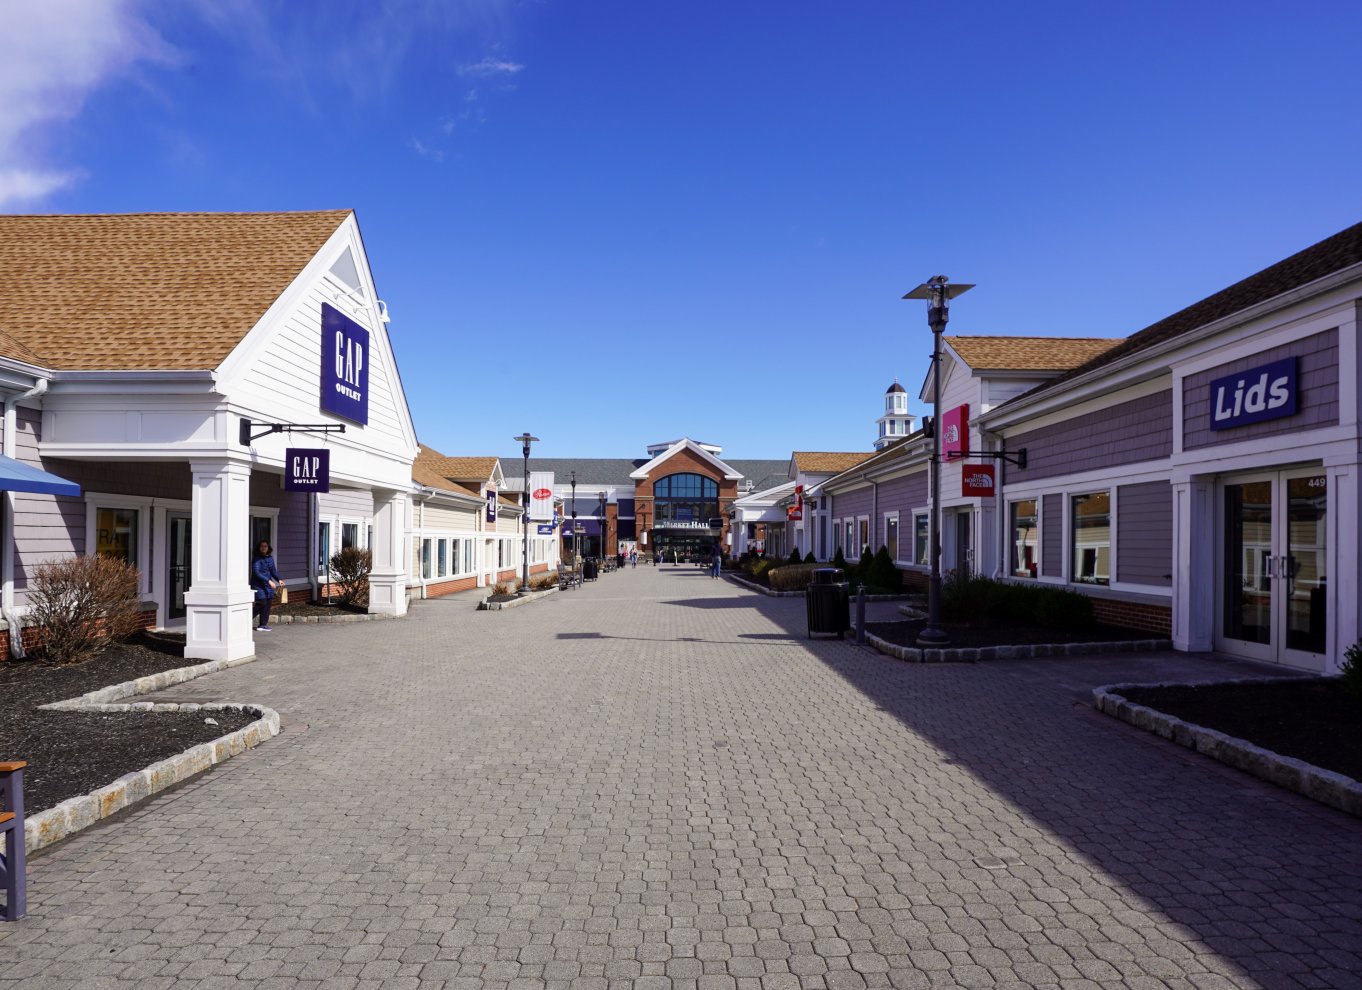 Woodbury Common Premium Outlets  Woodbury common, Premium outlets